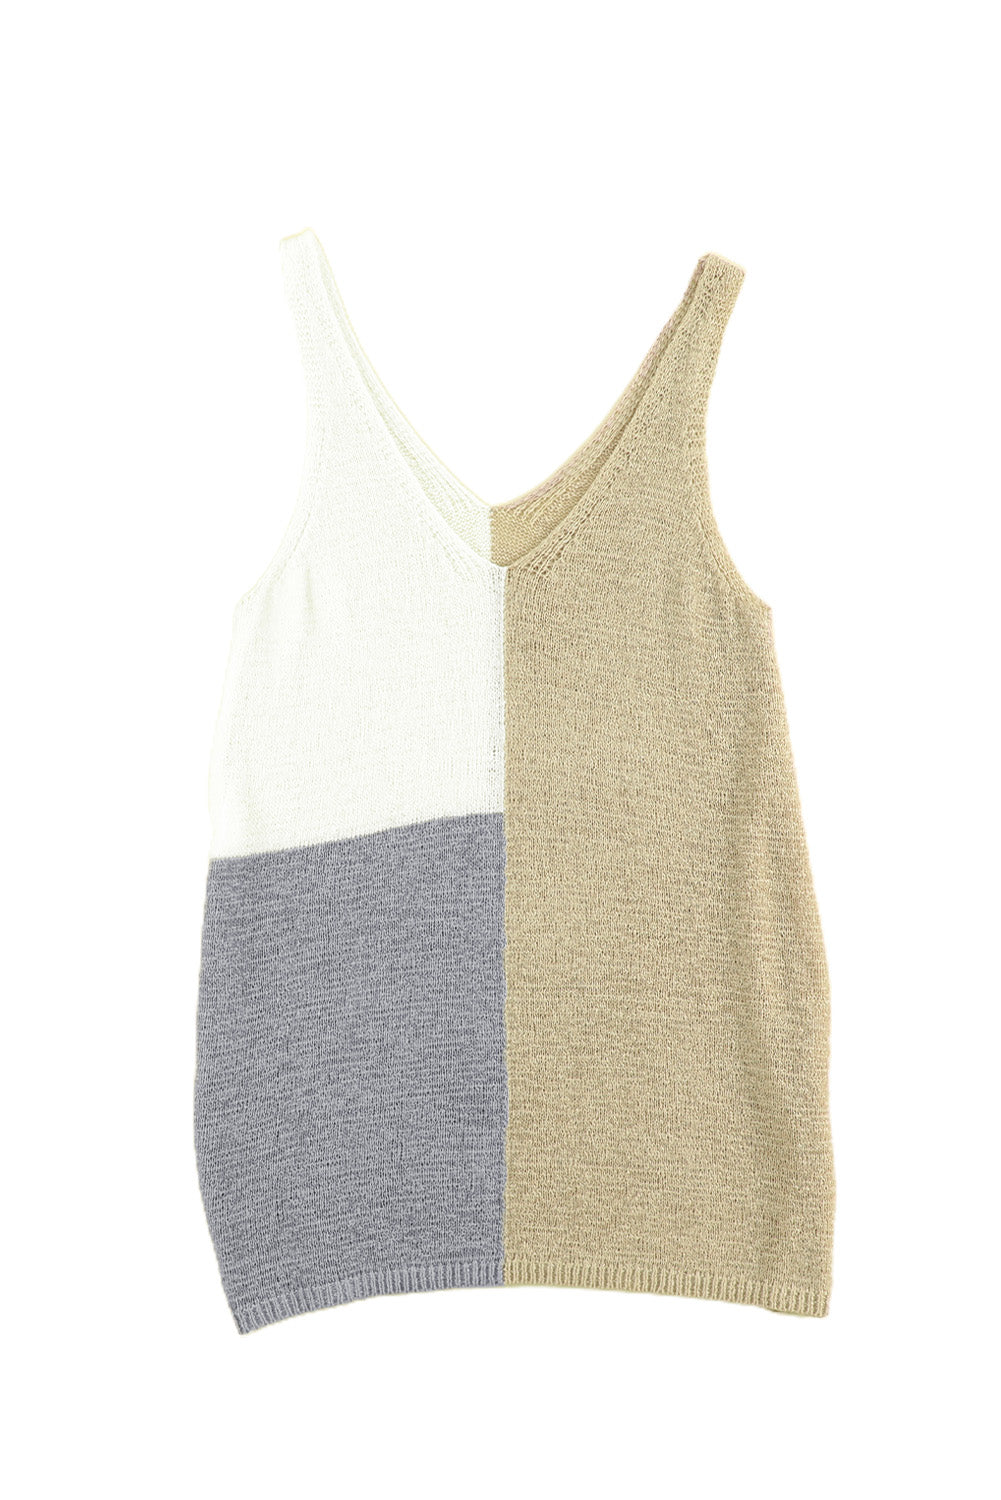 Apricot Color Block Knitted Tank Top Tank Tops JT's Designer Fashion